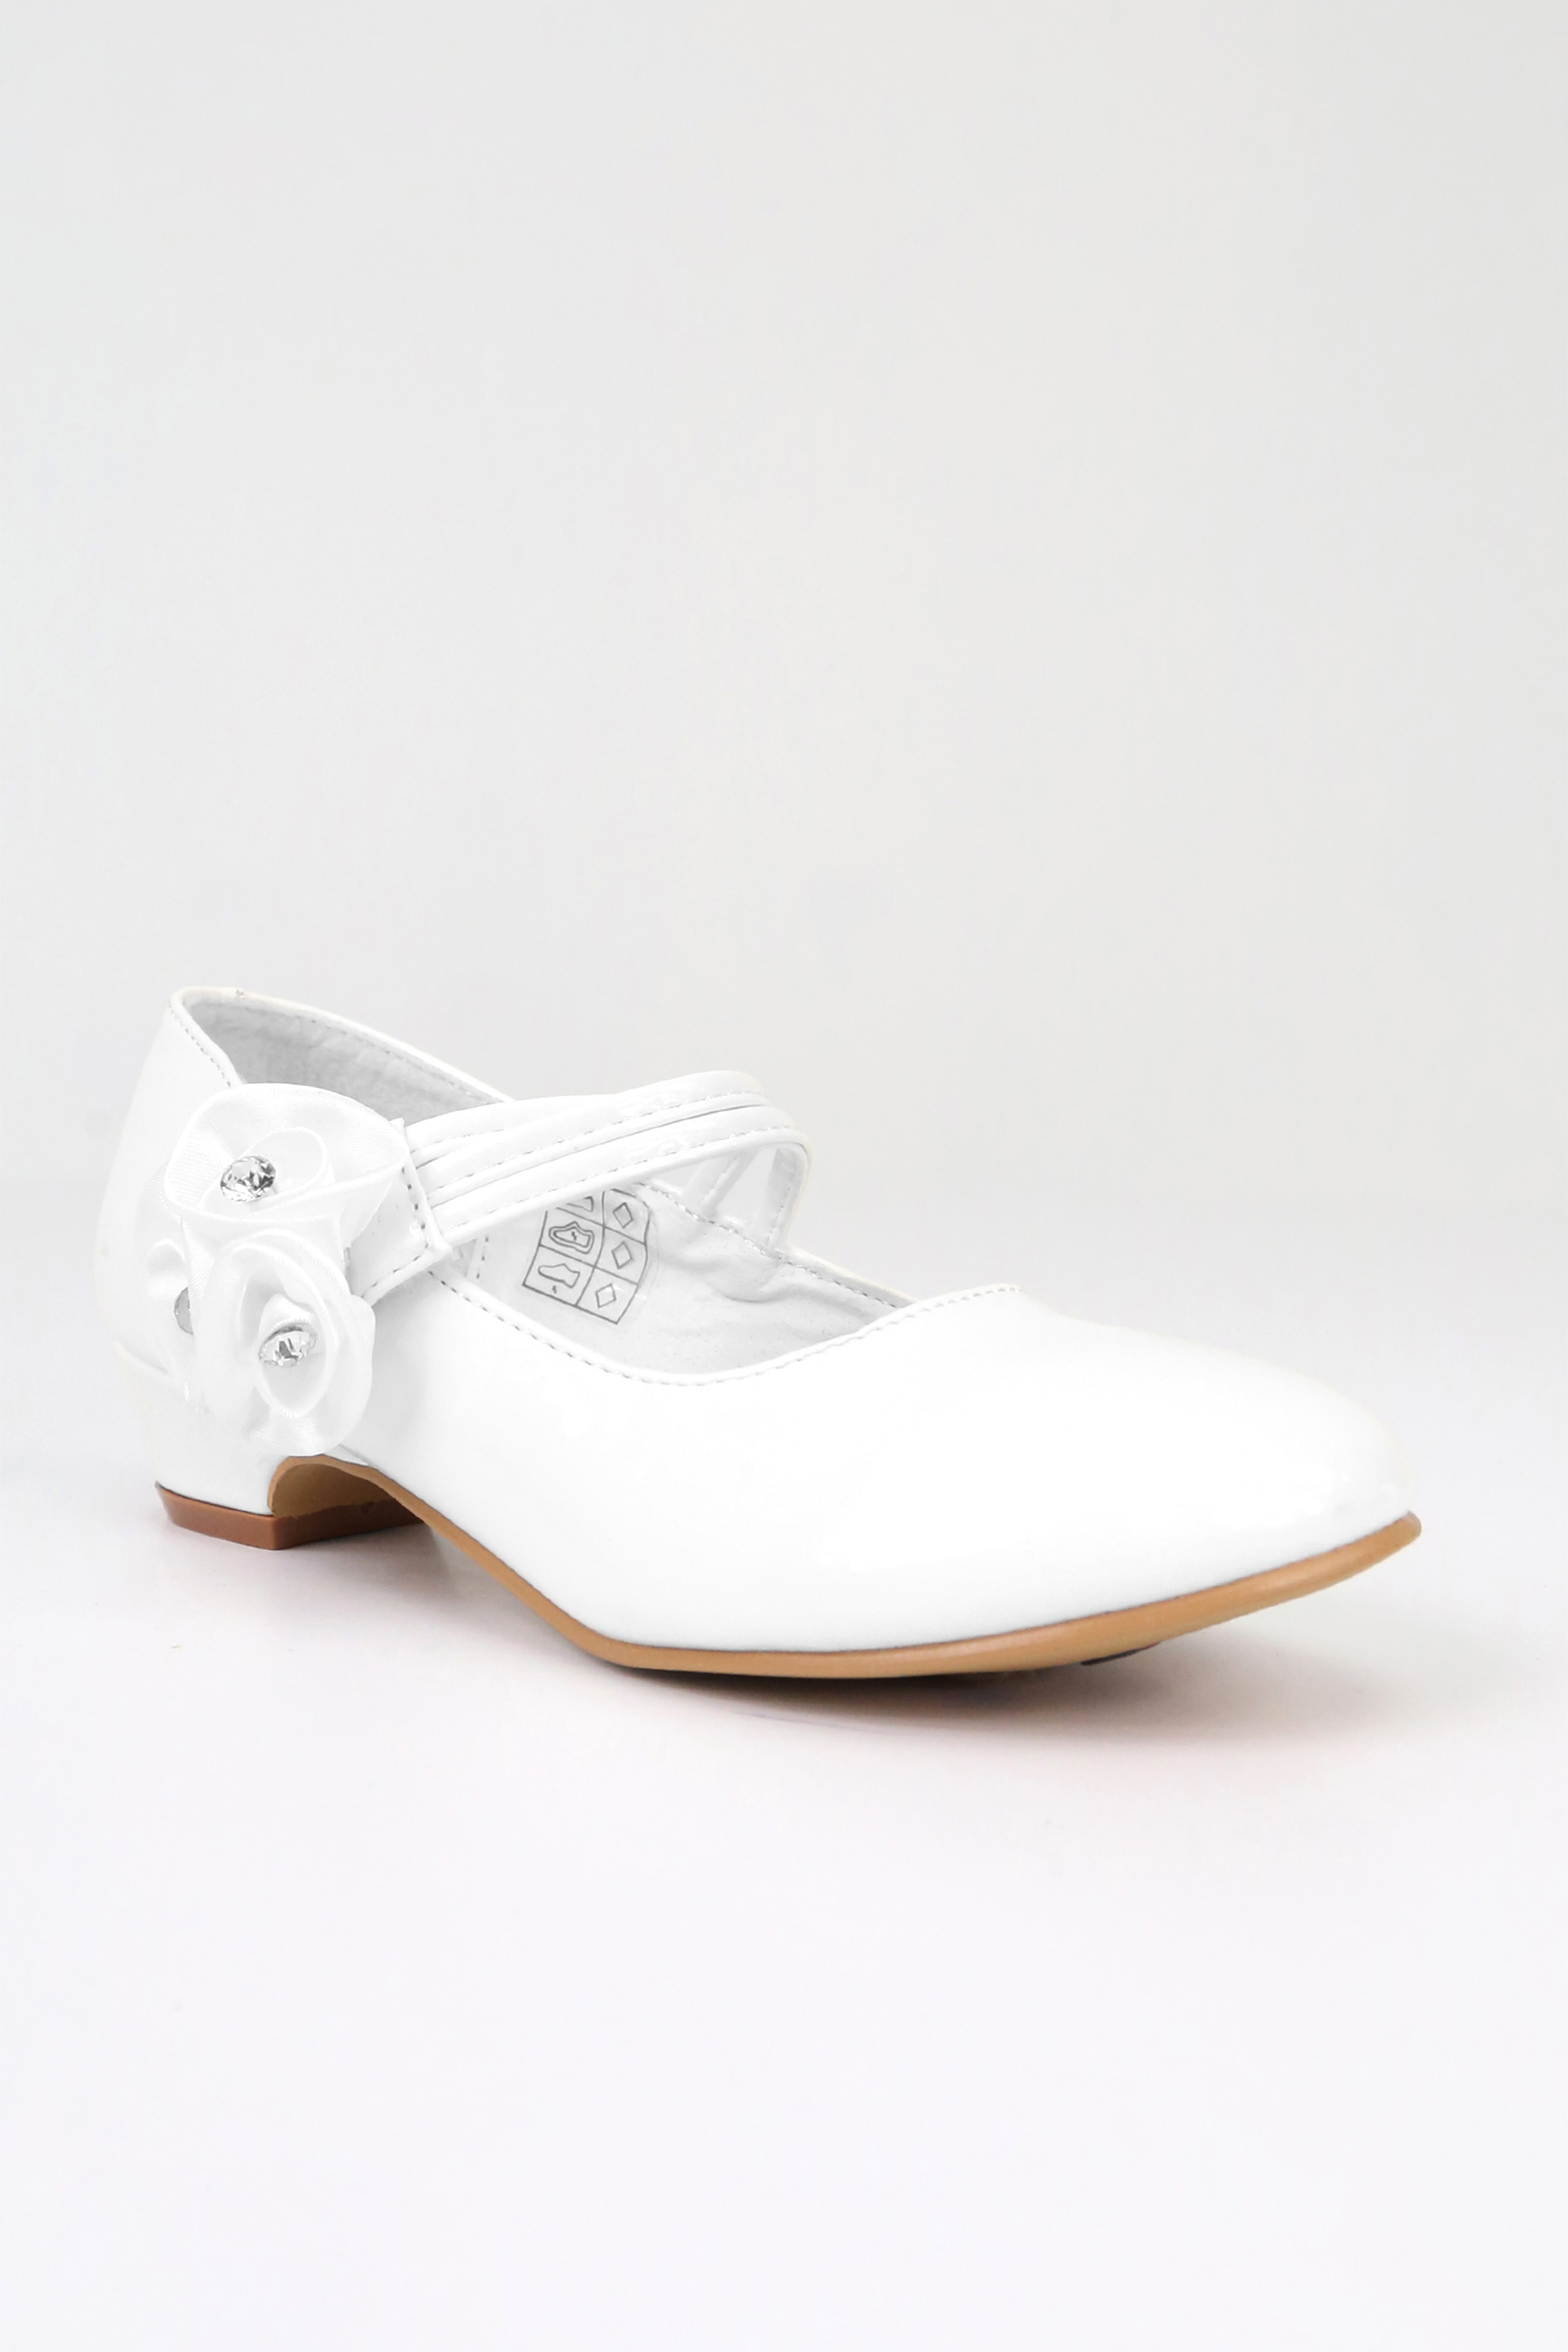 Girls' Mary Jane Low Heal Patent Dress shoes  - White